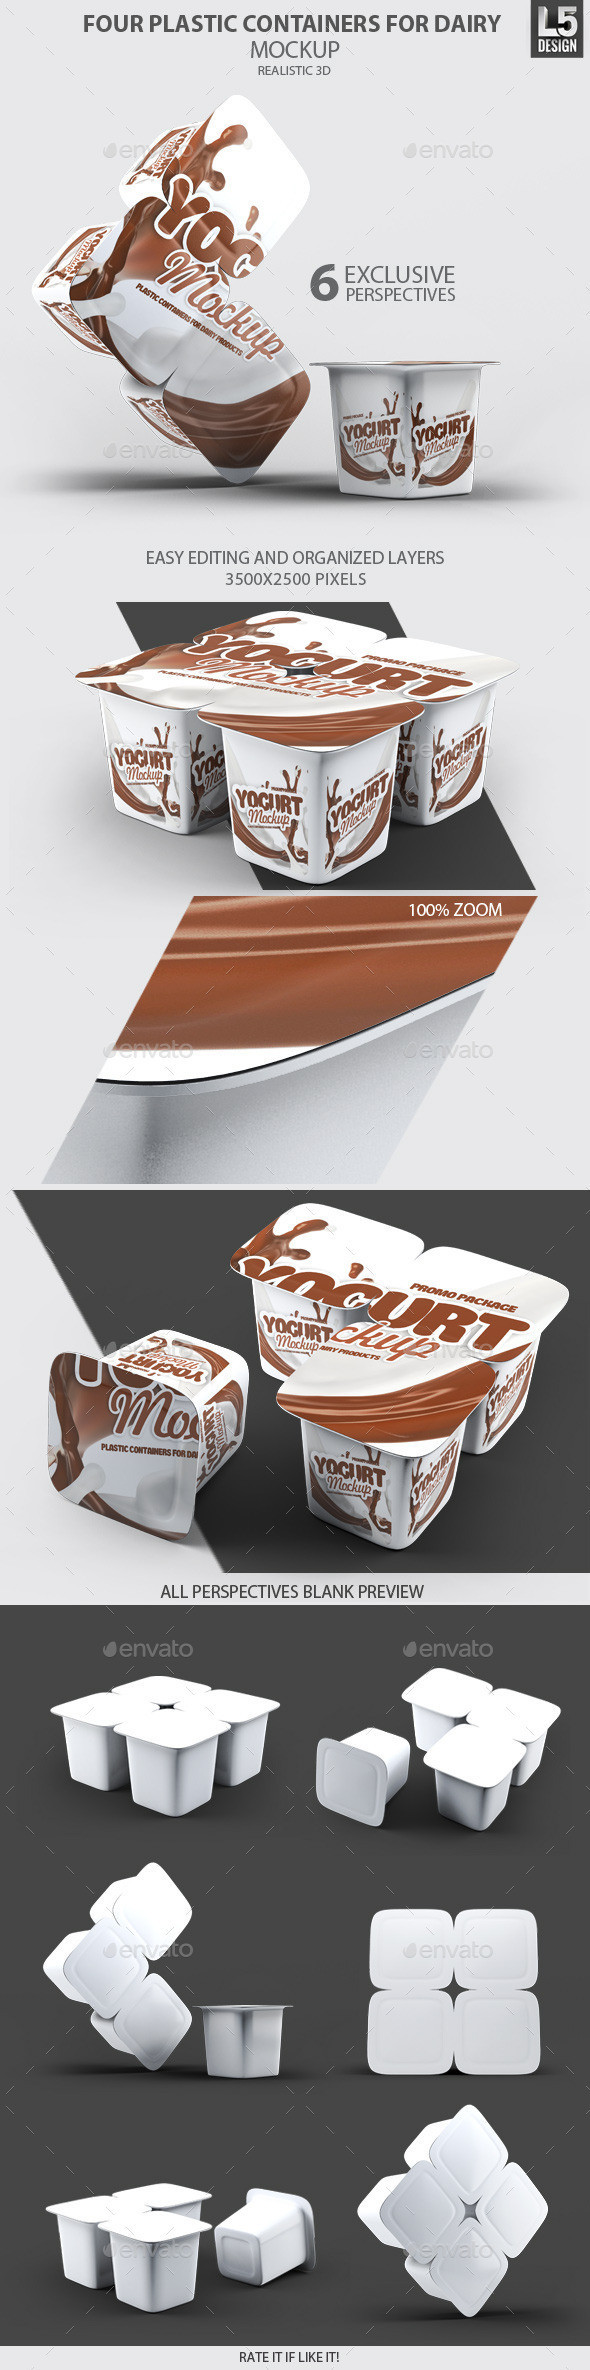 Containers for dairy mock up imagepre